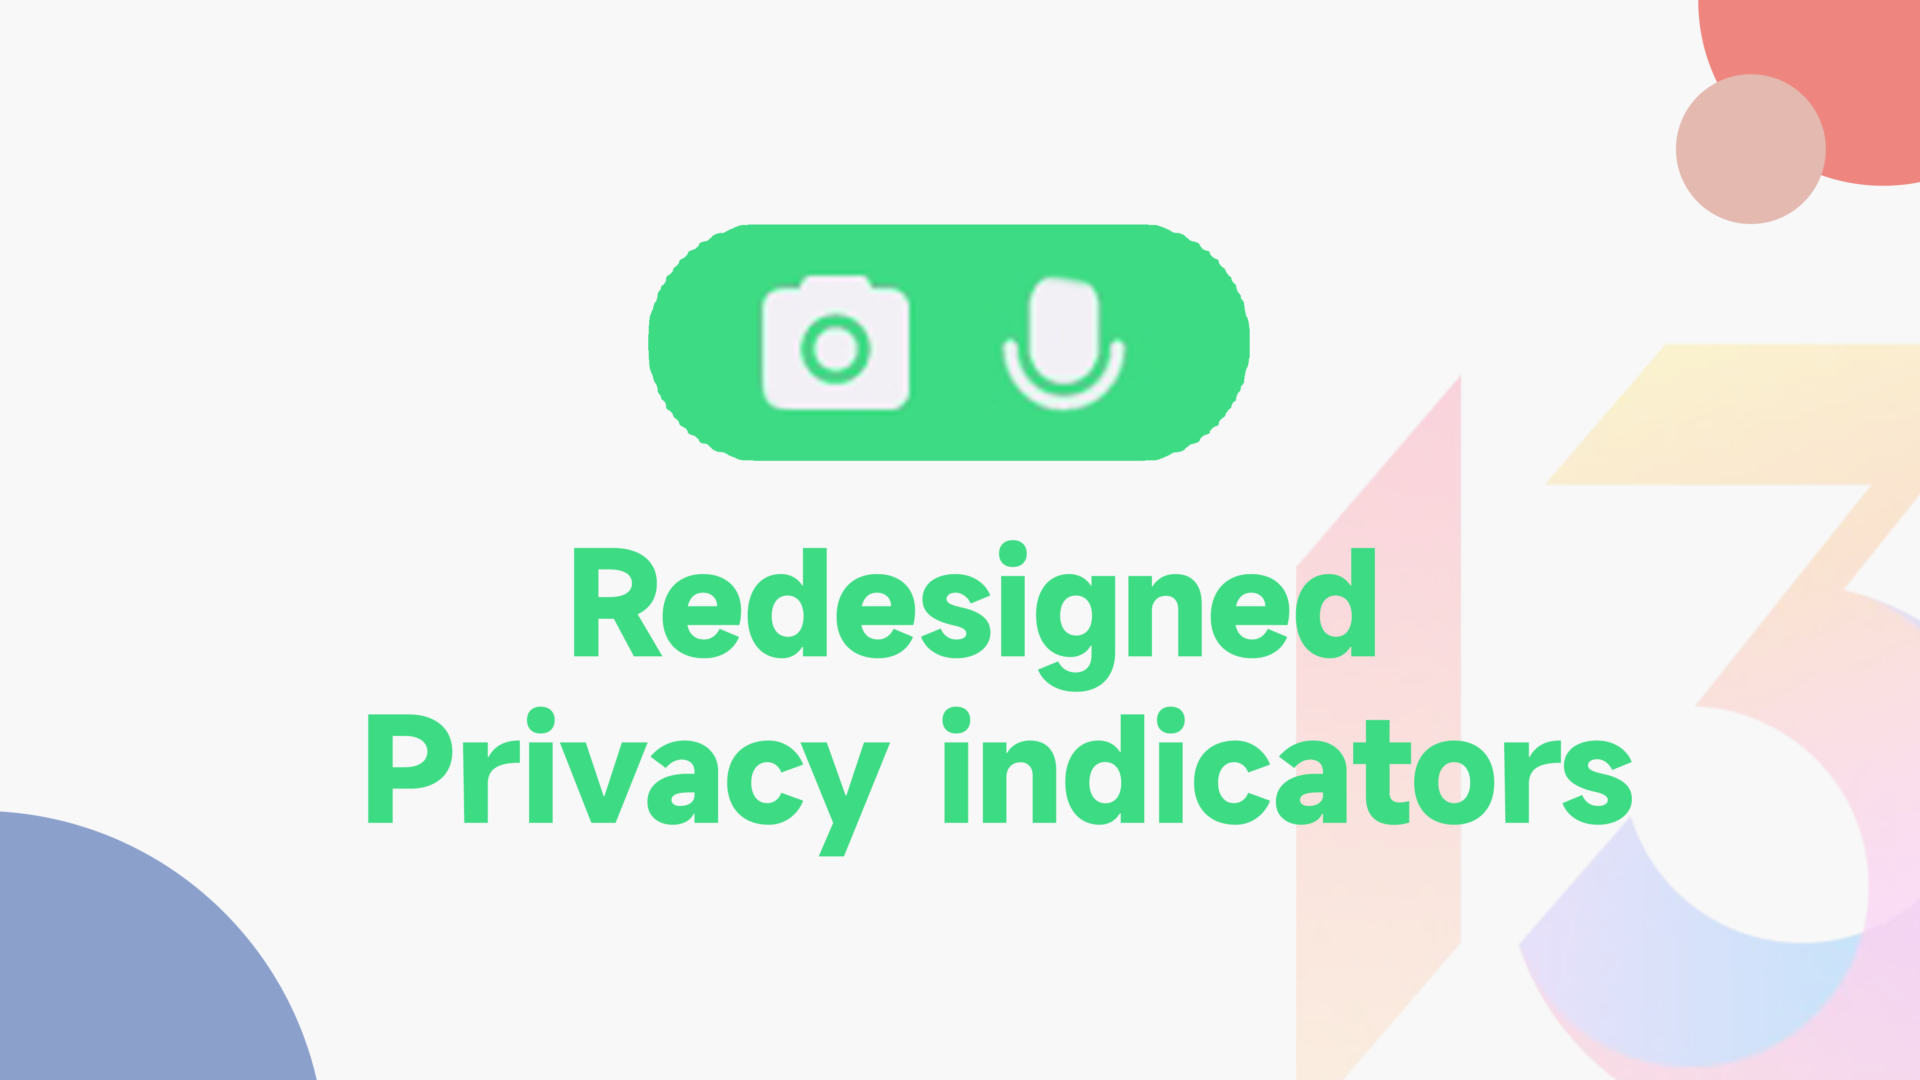 Redesigned privacy indicators are coming to MIUI 13 Global!